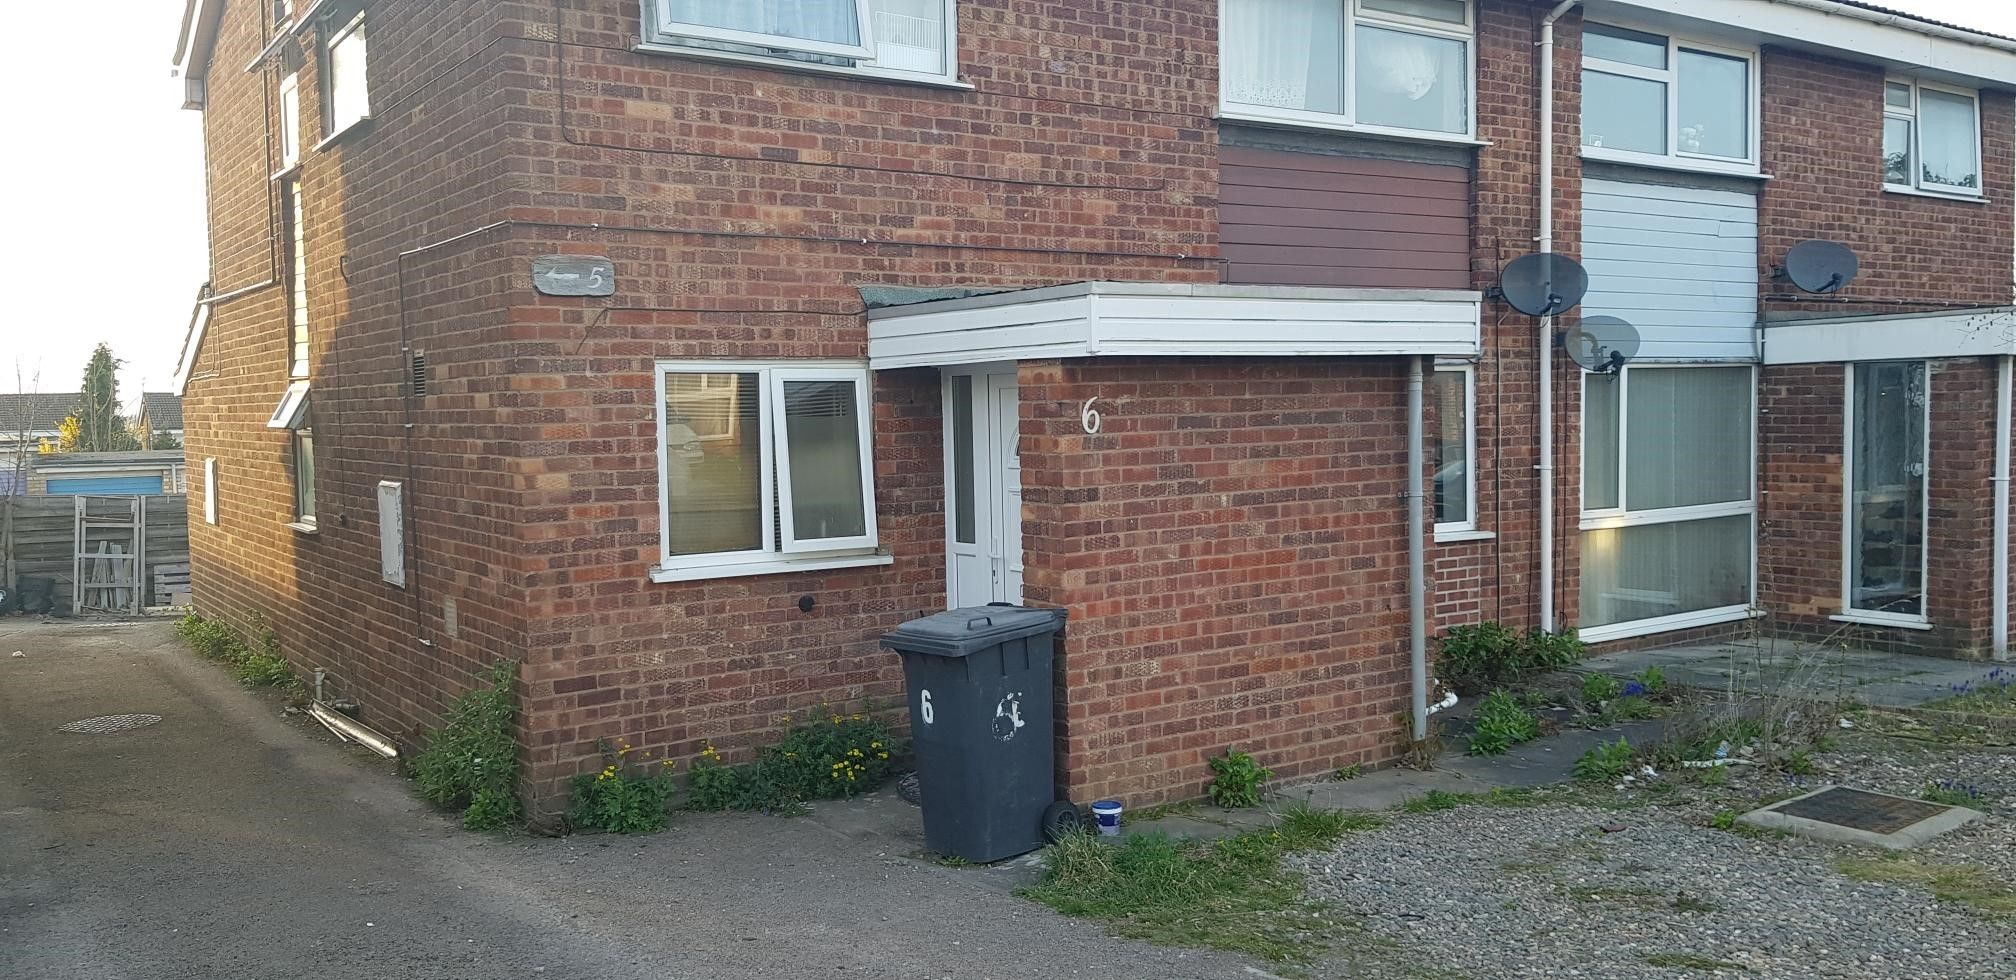 2 Bedroom Flat To Rent Teignmouth Close Leicester Le5 5nu